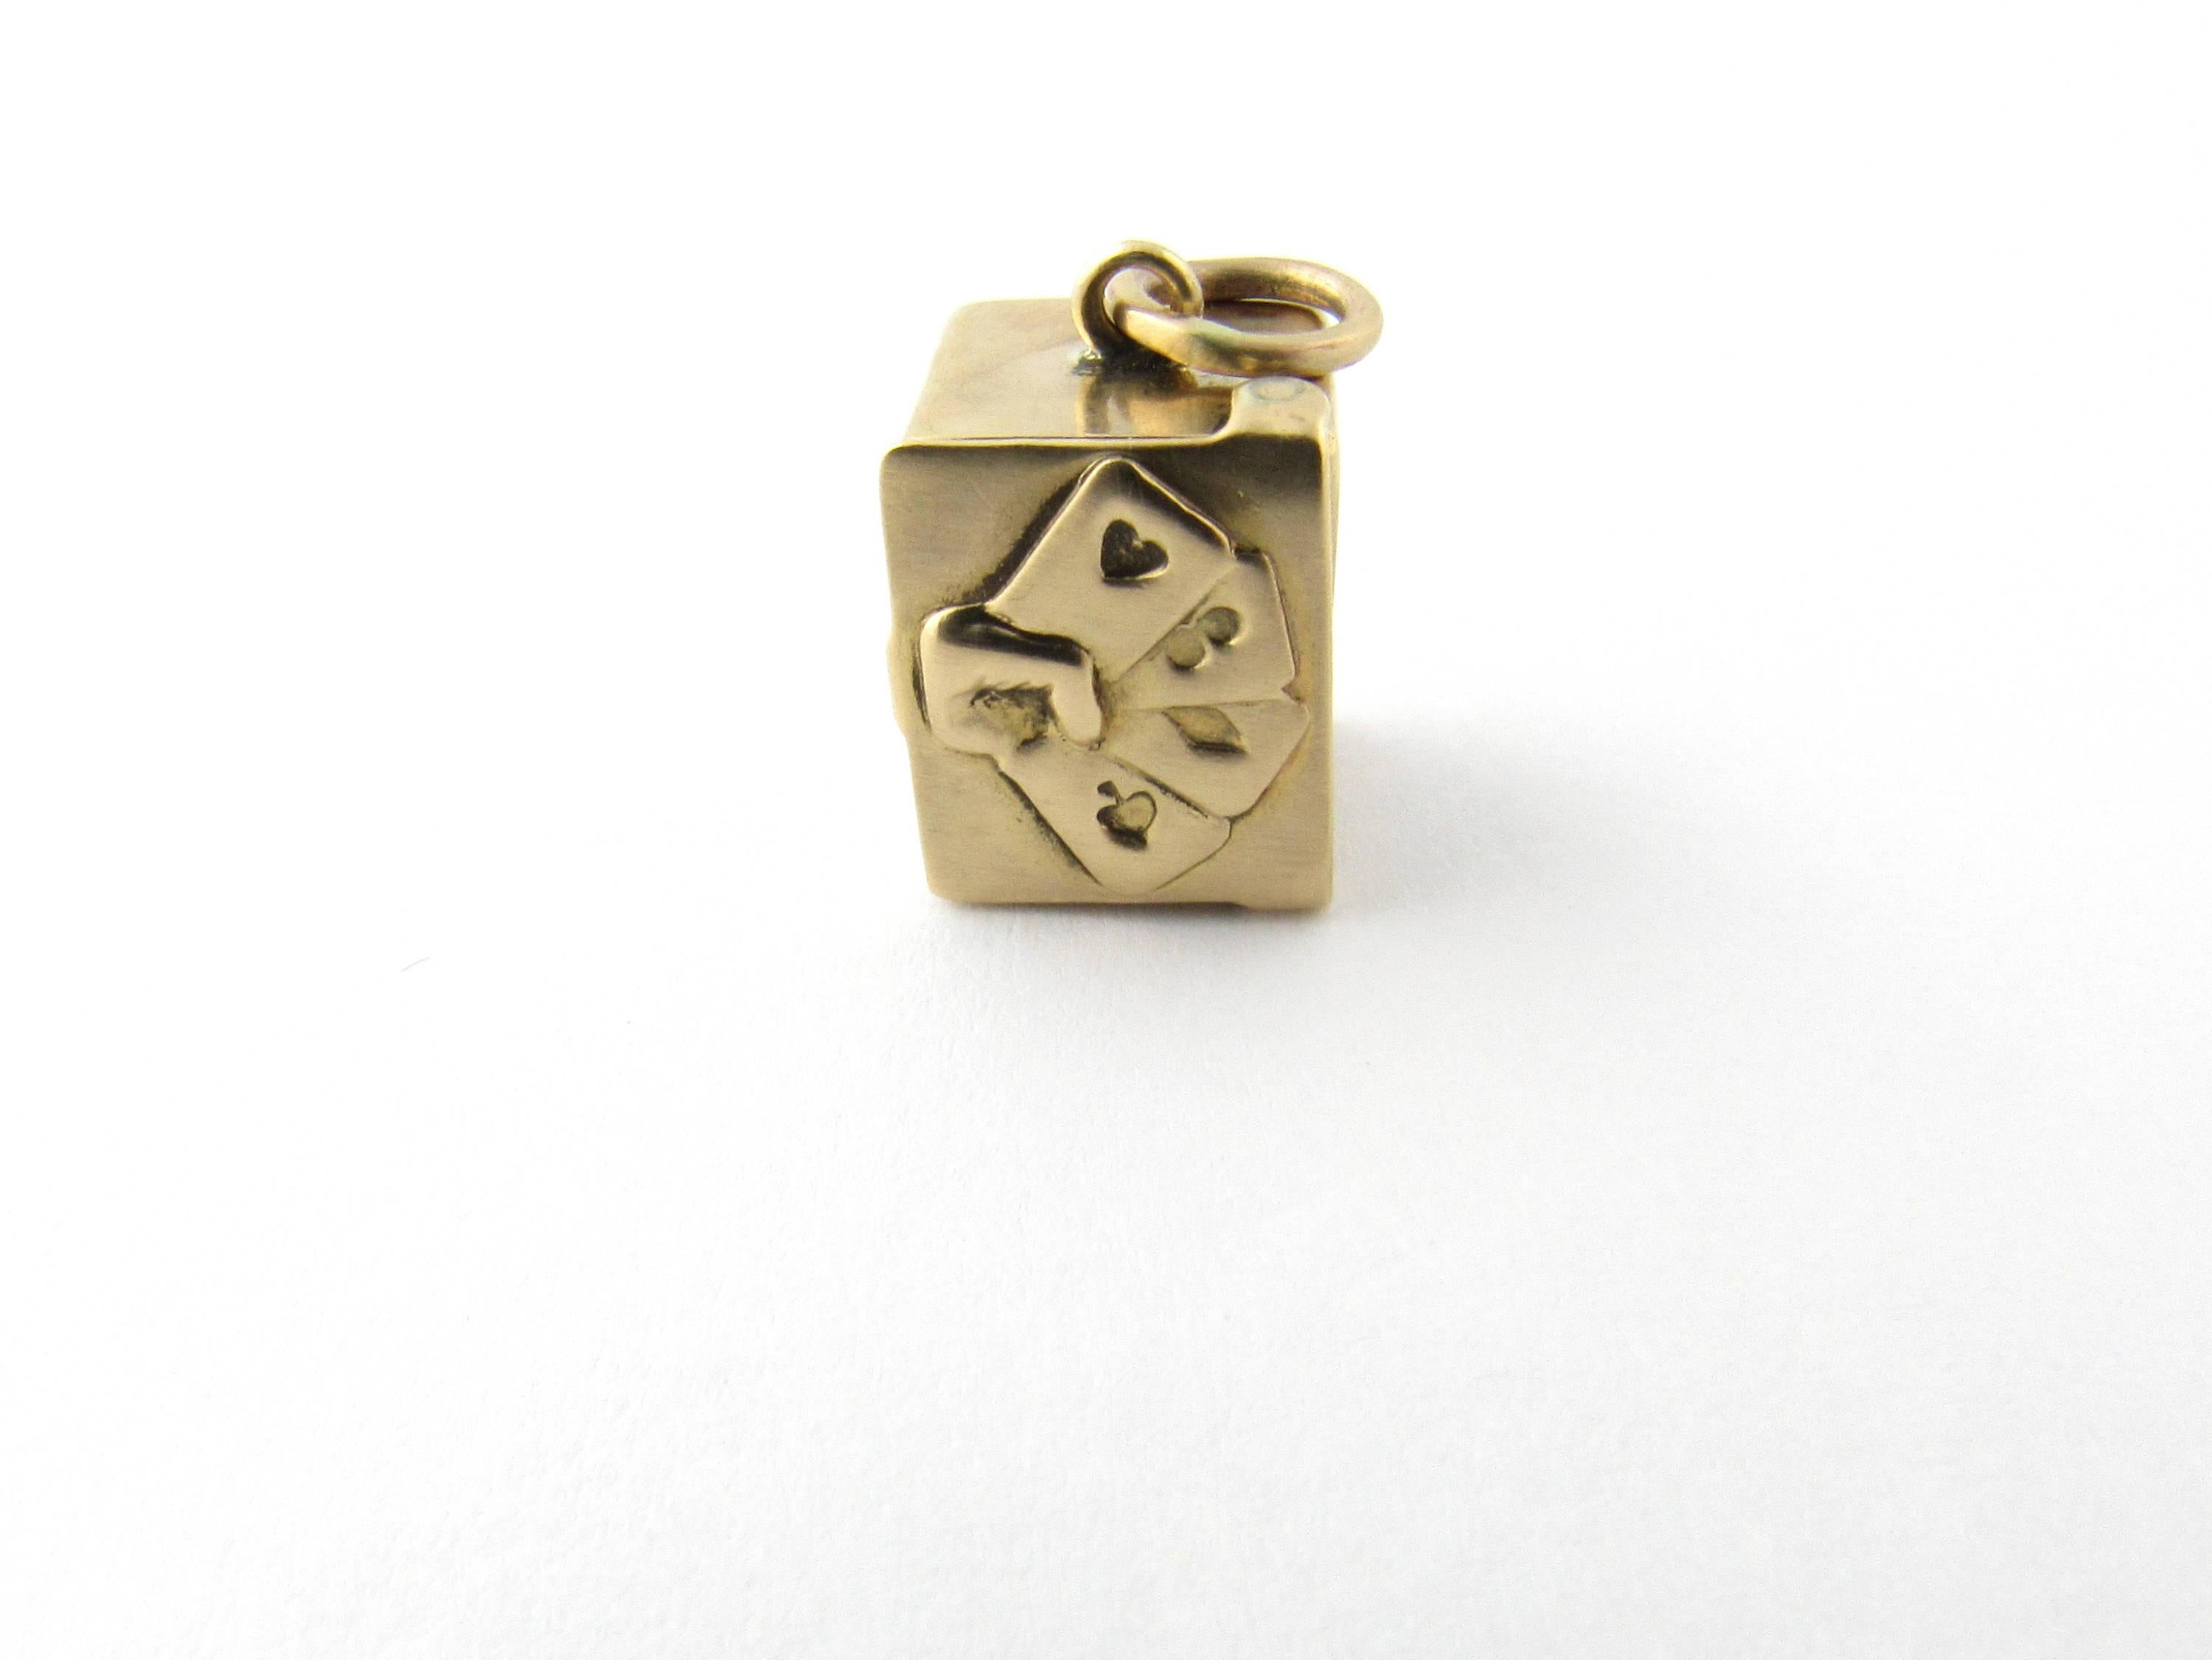 Vintage 14 Karat Yellow Gold Deck of Cards Charm
Perfect gift for the card player! 
This 3D charm features a miniature deck of playing cards in 14K gold case adorned with a hand holding four cards. Two visible cards show some fading. 
Size:  12 mm